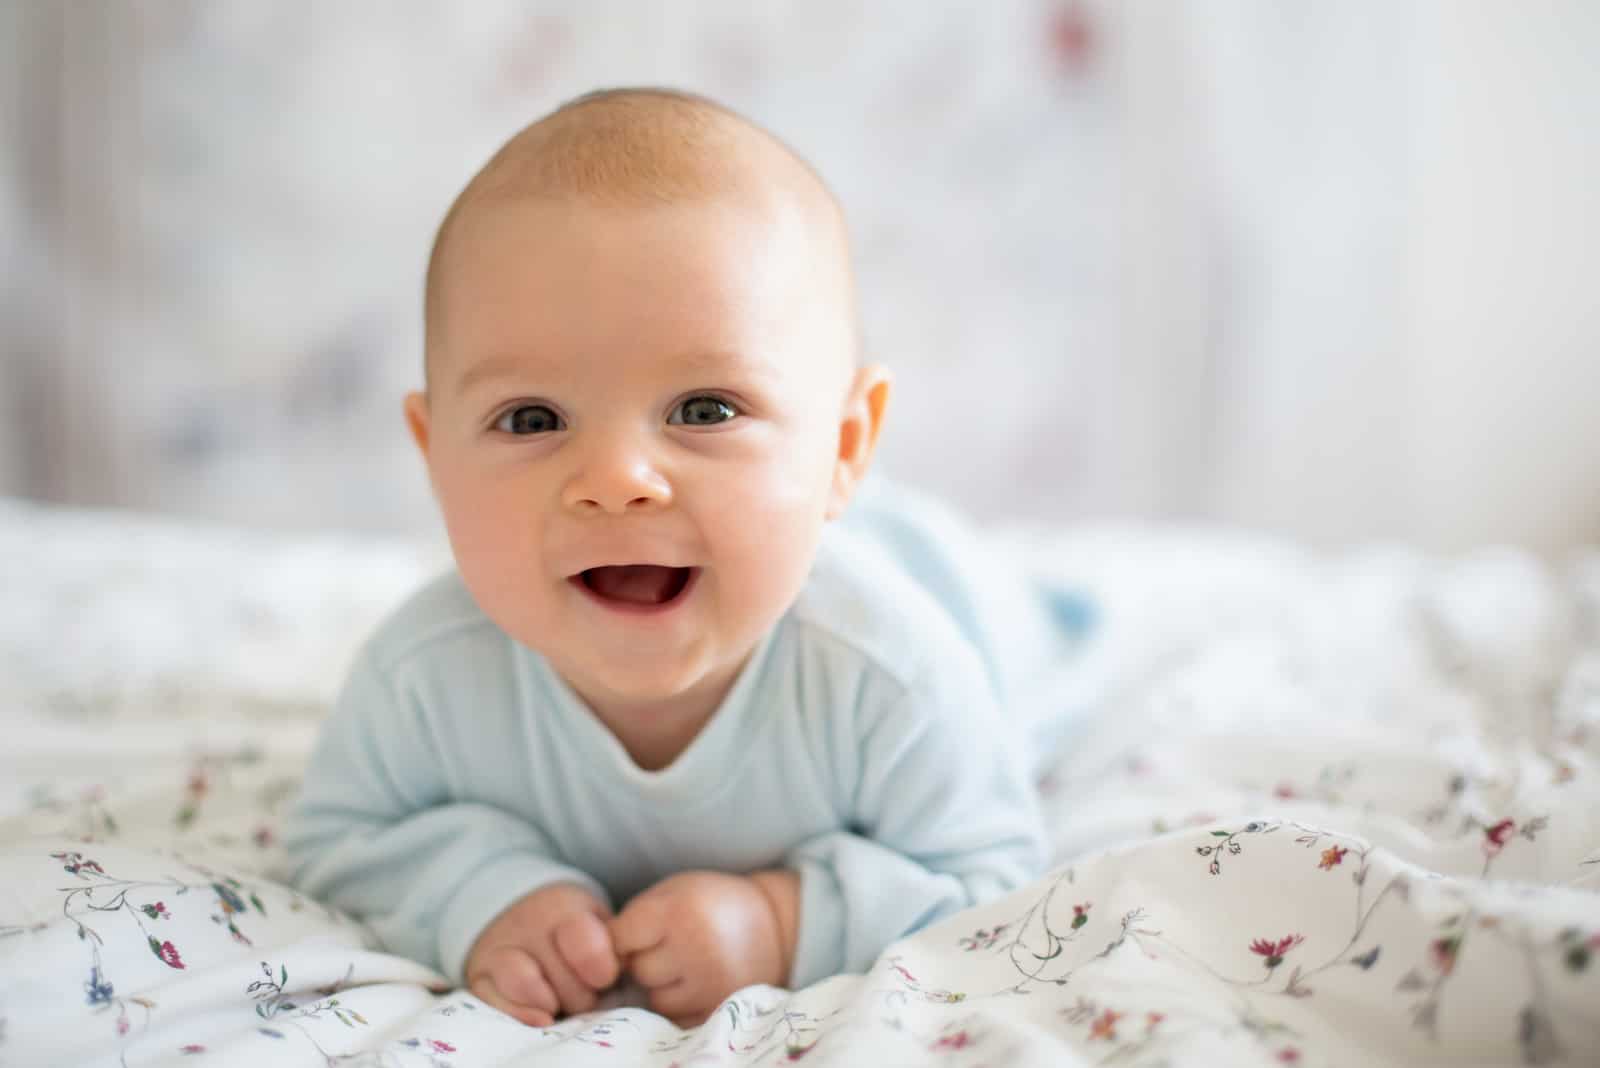 Newborn kid during tummy time smiling happily 